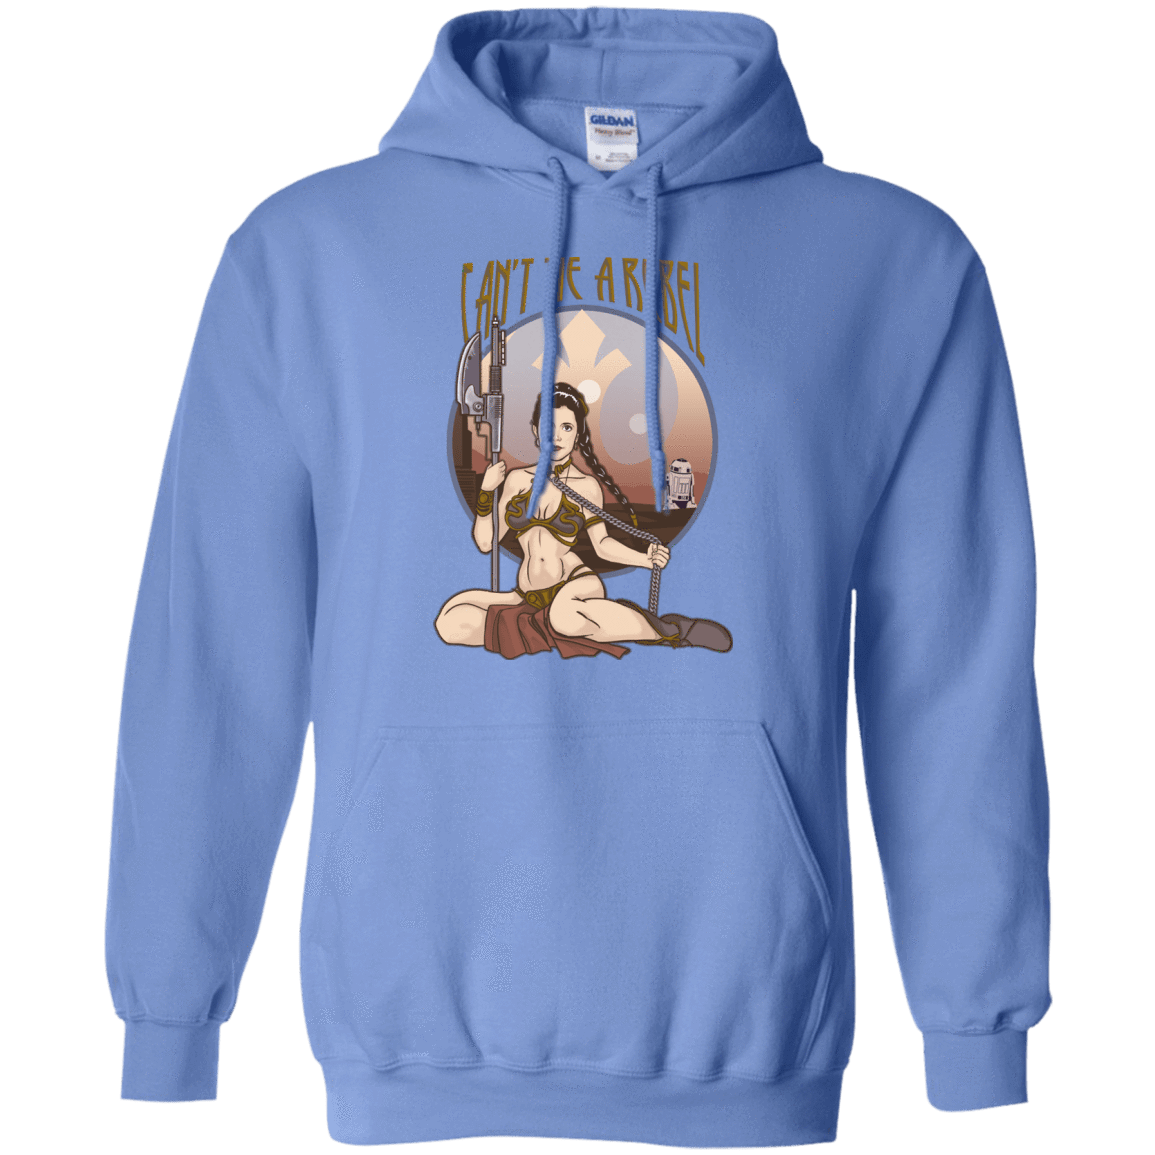 Sweatshirts Carolina Blue / Small Can't Tie a Rebel Pullover Hoodie